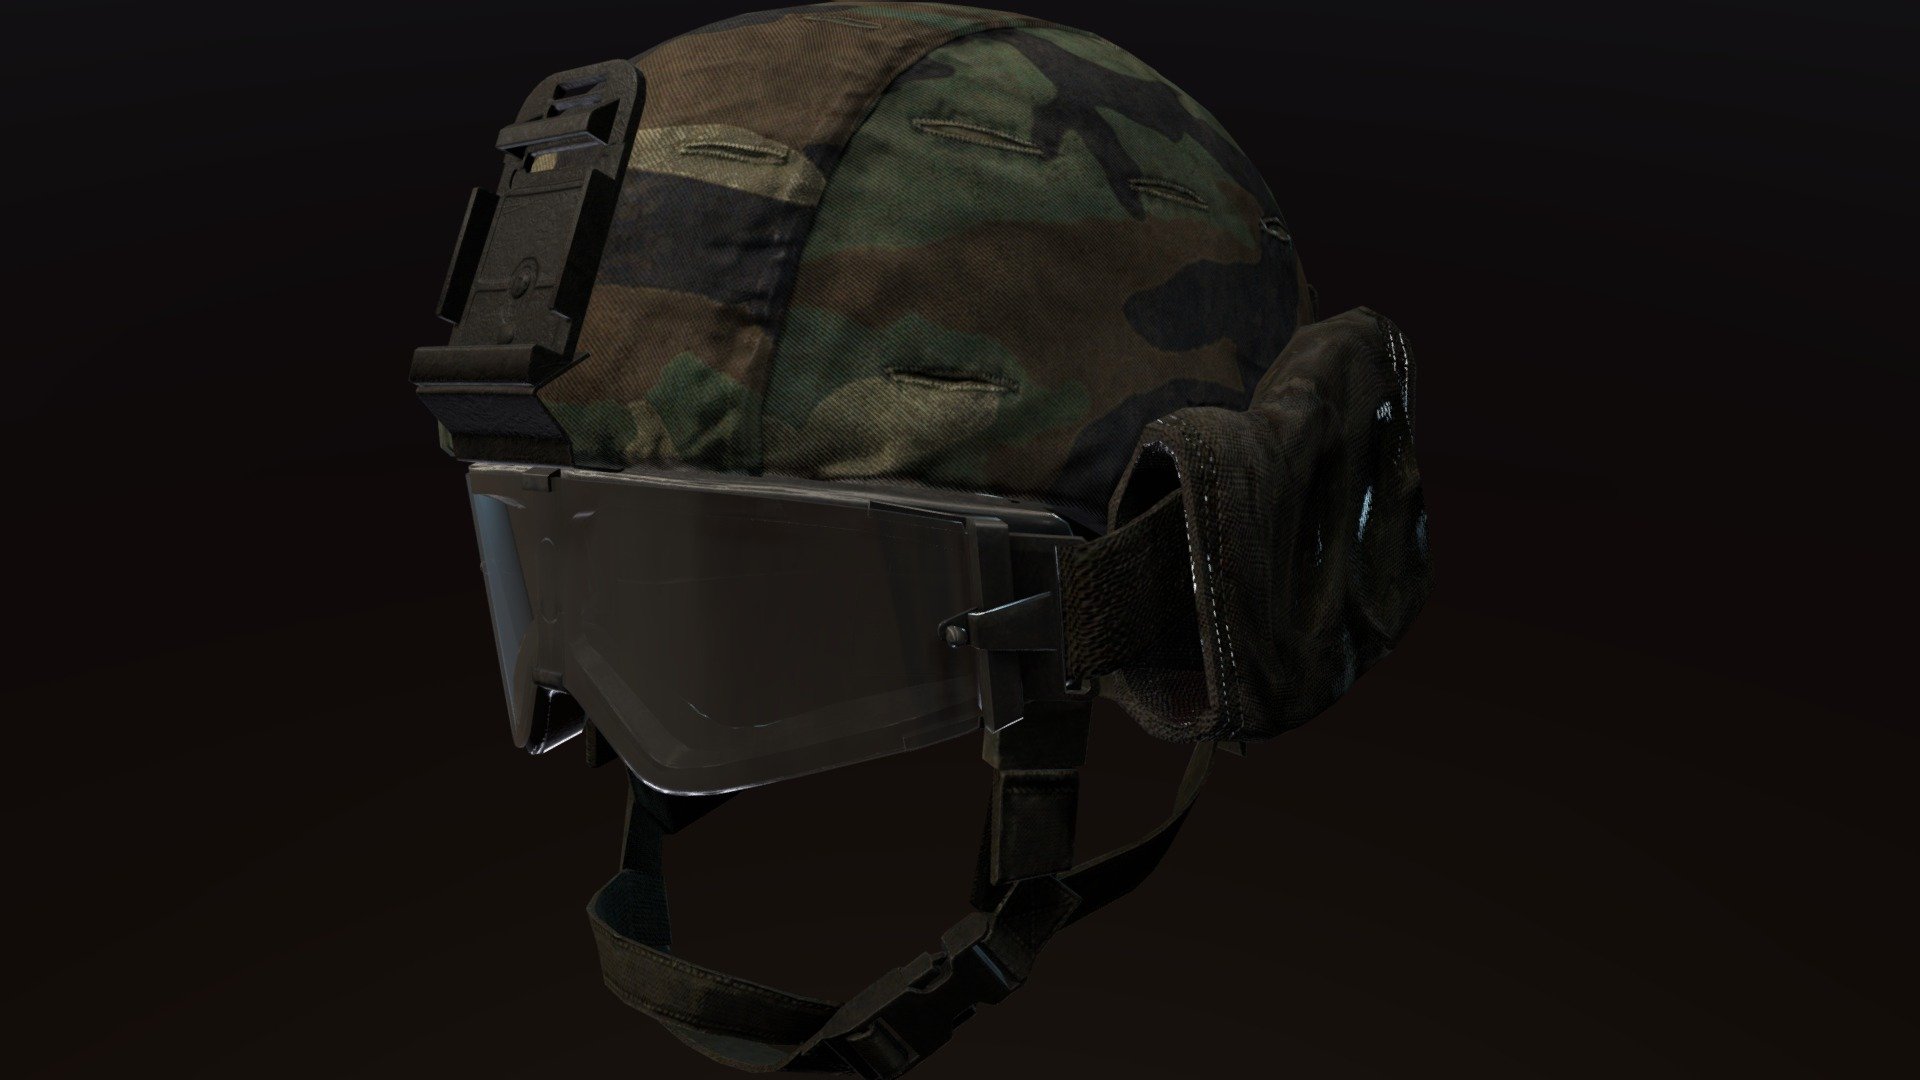 Adopted in early 2000s, initially issued for SF units, later on fielded for use by regulars  as early as 2003, slowly replacing the PASGT helmet. 
First issued ib reversible woodland/desert camo. seen here in the models are the reversible covers, where the desert side has the rear flaps inside-out. starting from 2005 the woodland/desert camos are slowly replaced by the universally-detested yet iconic Universal Camo Pattern. 
Included are accessories such as X800 and ESS Goggles (and their sleeve covers), surfire lights, MS2000 strobe

ESS goggles mesh by jujurat, Helmet shape adjusted by Motta

Modelled in blender, textured in Quixel Suite and Photoshop



 - MICH/ACH Covered - Buy Royalty Free 3D model by simcardo 3d model